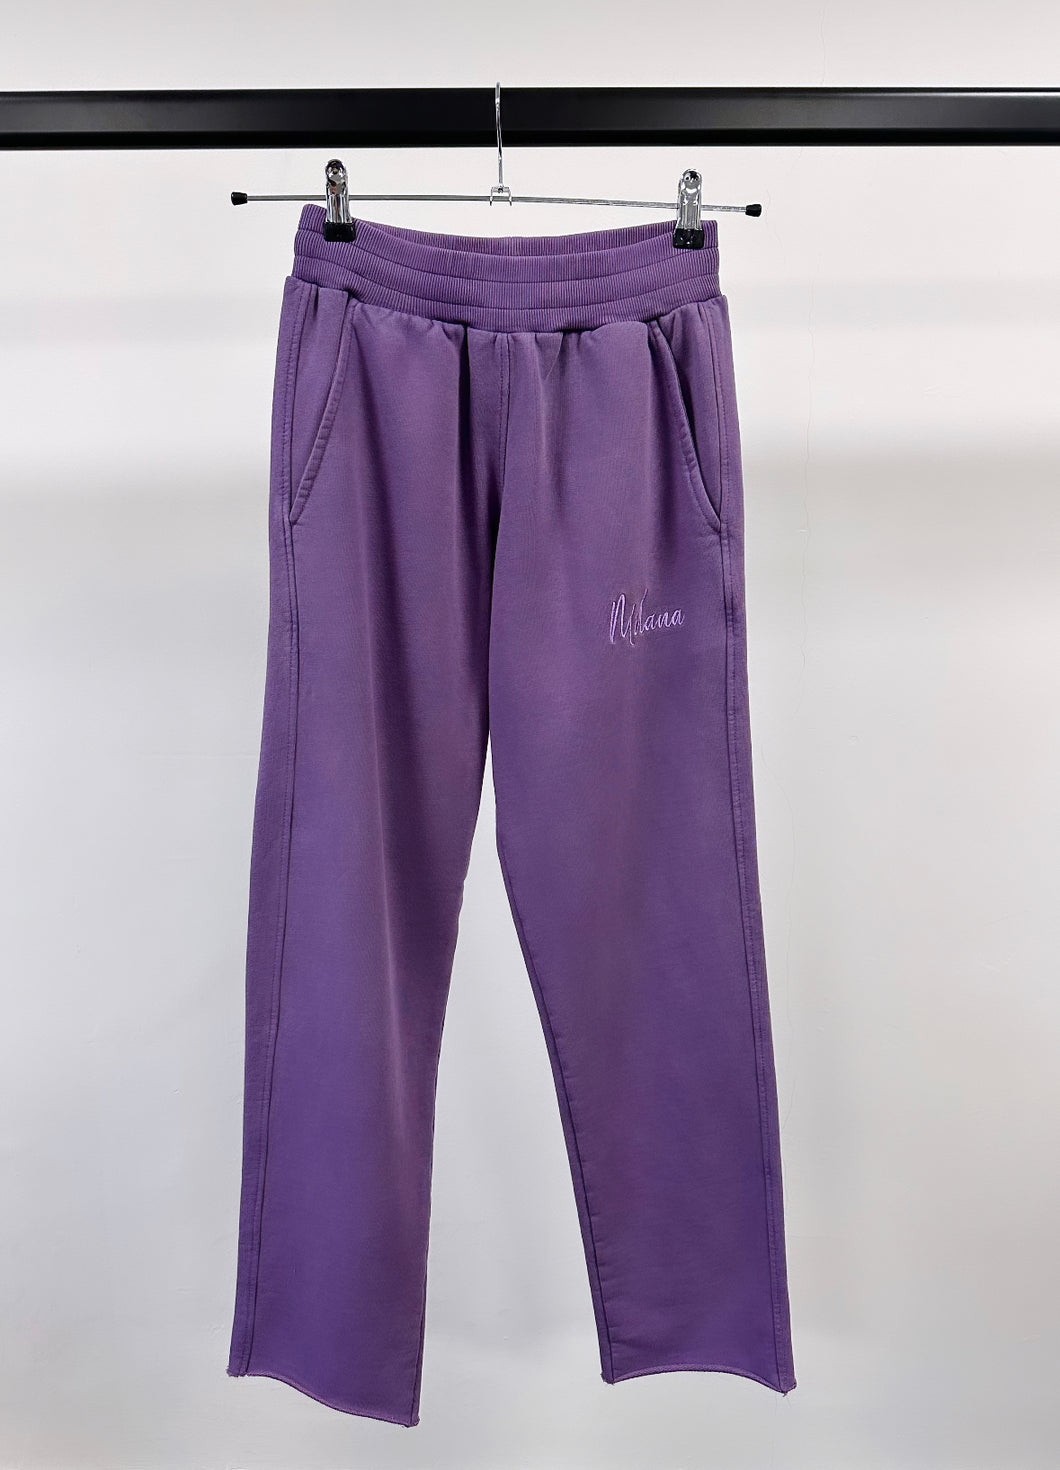 Washed Purple Relaxed Sweatpants.